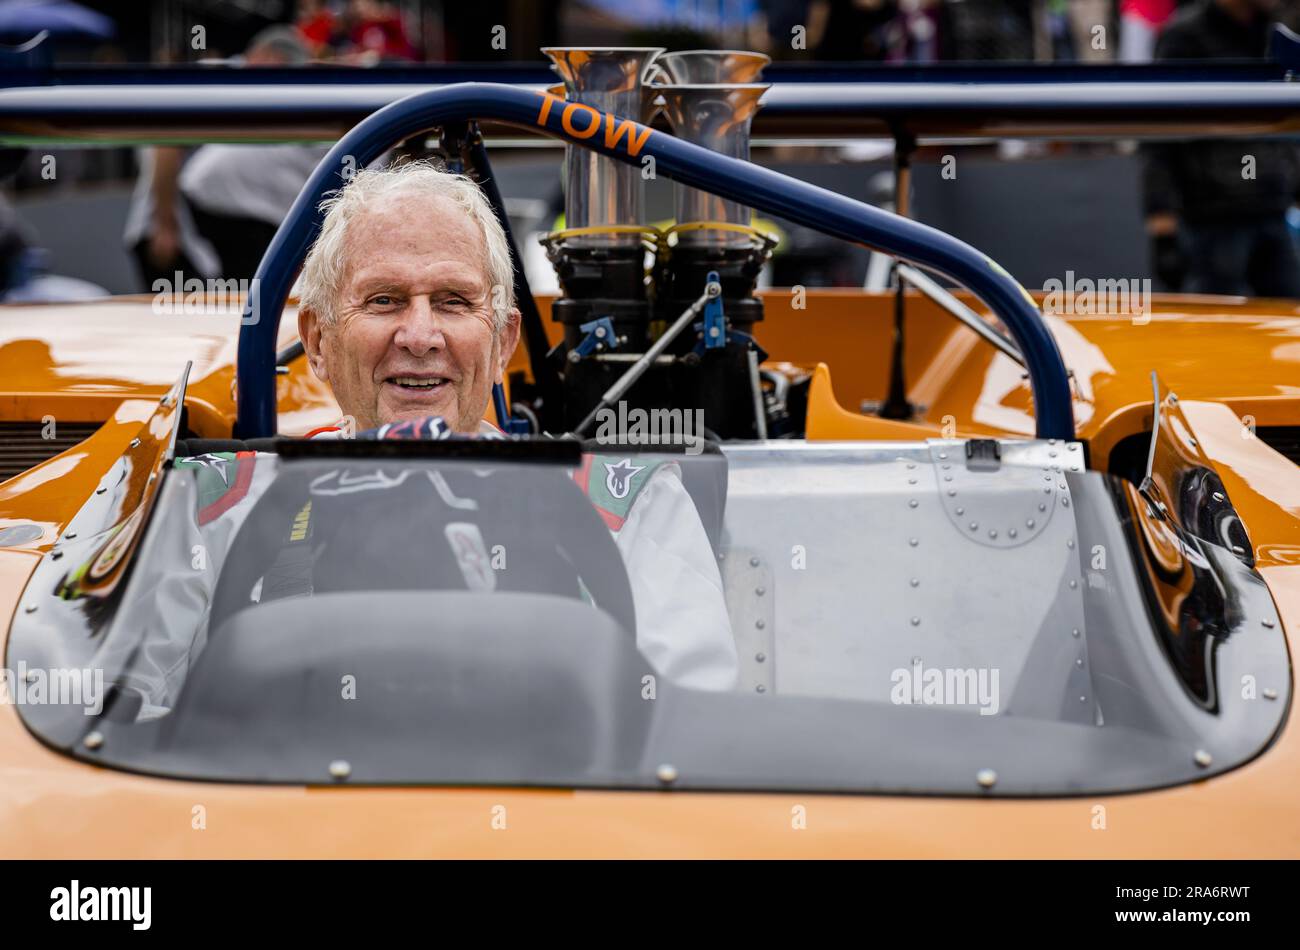 SPIELBERG - Helmut Marko (Red Bull Racing) ahead of a parade of legendary racing cars leading up to the Austrian Grand Prix at the Red Bull Ring on July 01, 2023 in Spielberg, Austria. ANP SEM VAN DER WAL Stock Photo